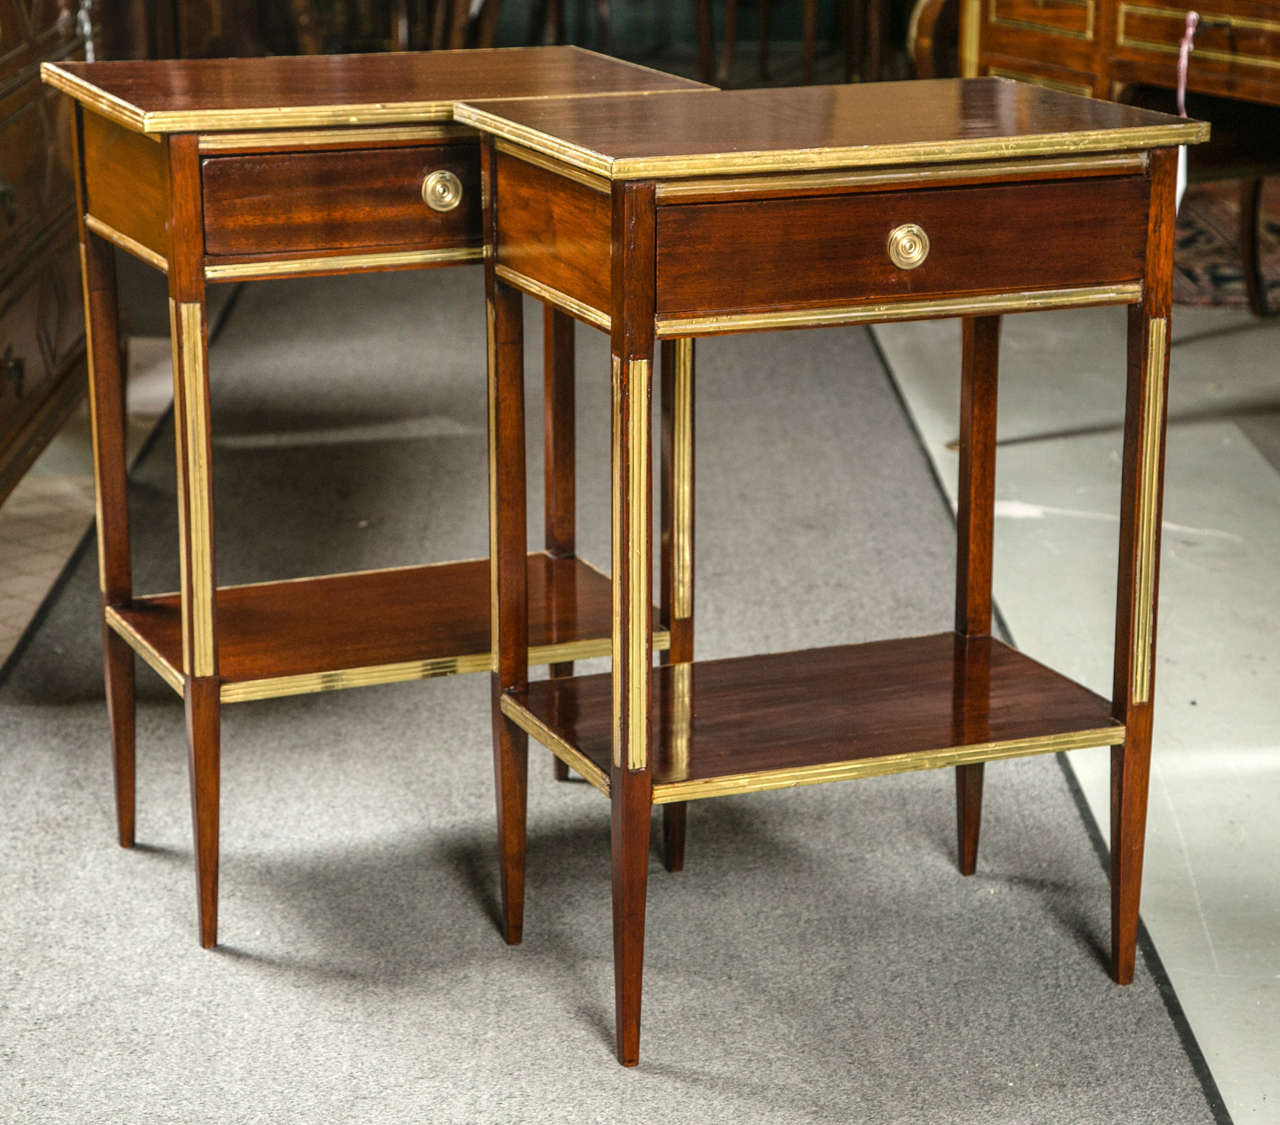 A wonderful pair of bronze mounted nightstands or end tables. The narrow tapering legs leading to a lower shelf used as an undercarriage supporting the continuing legs with bronze fluted mounts on front and sides leading to a single bronze framed